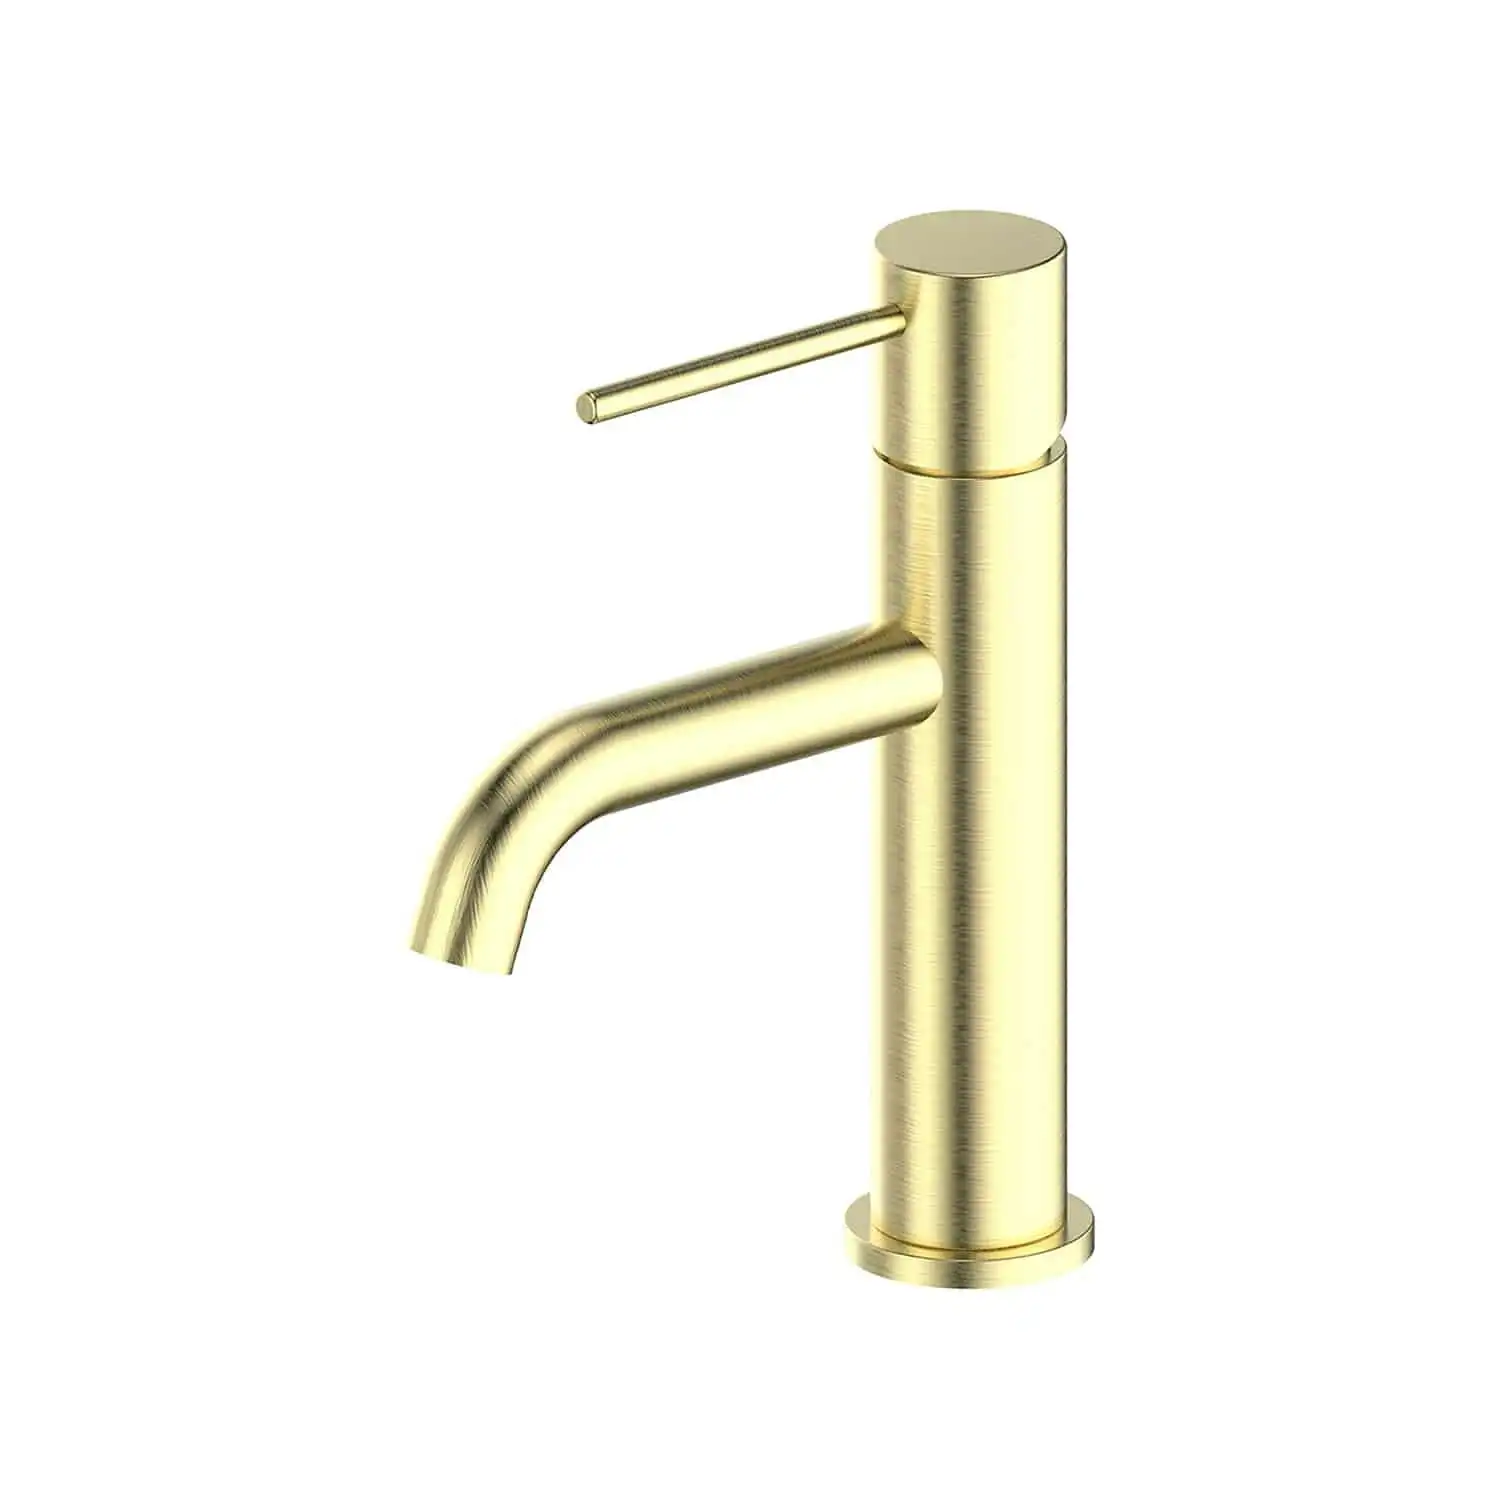 Greens Gisele Basin Mixer PVD Brushed Brass 18402556